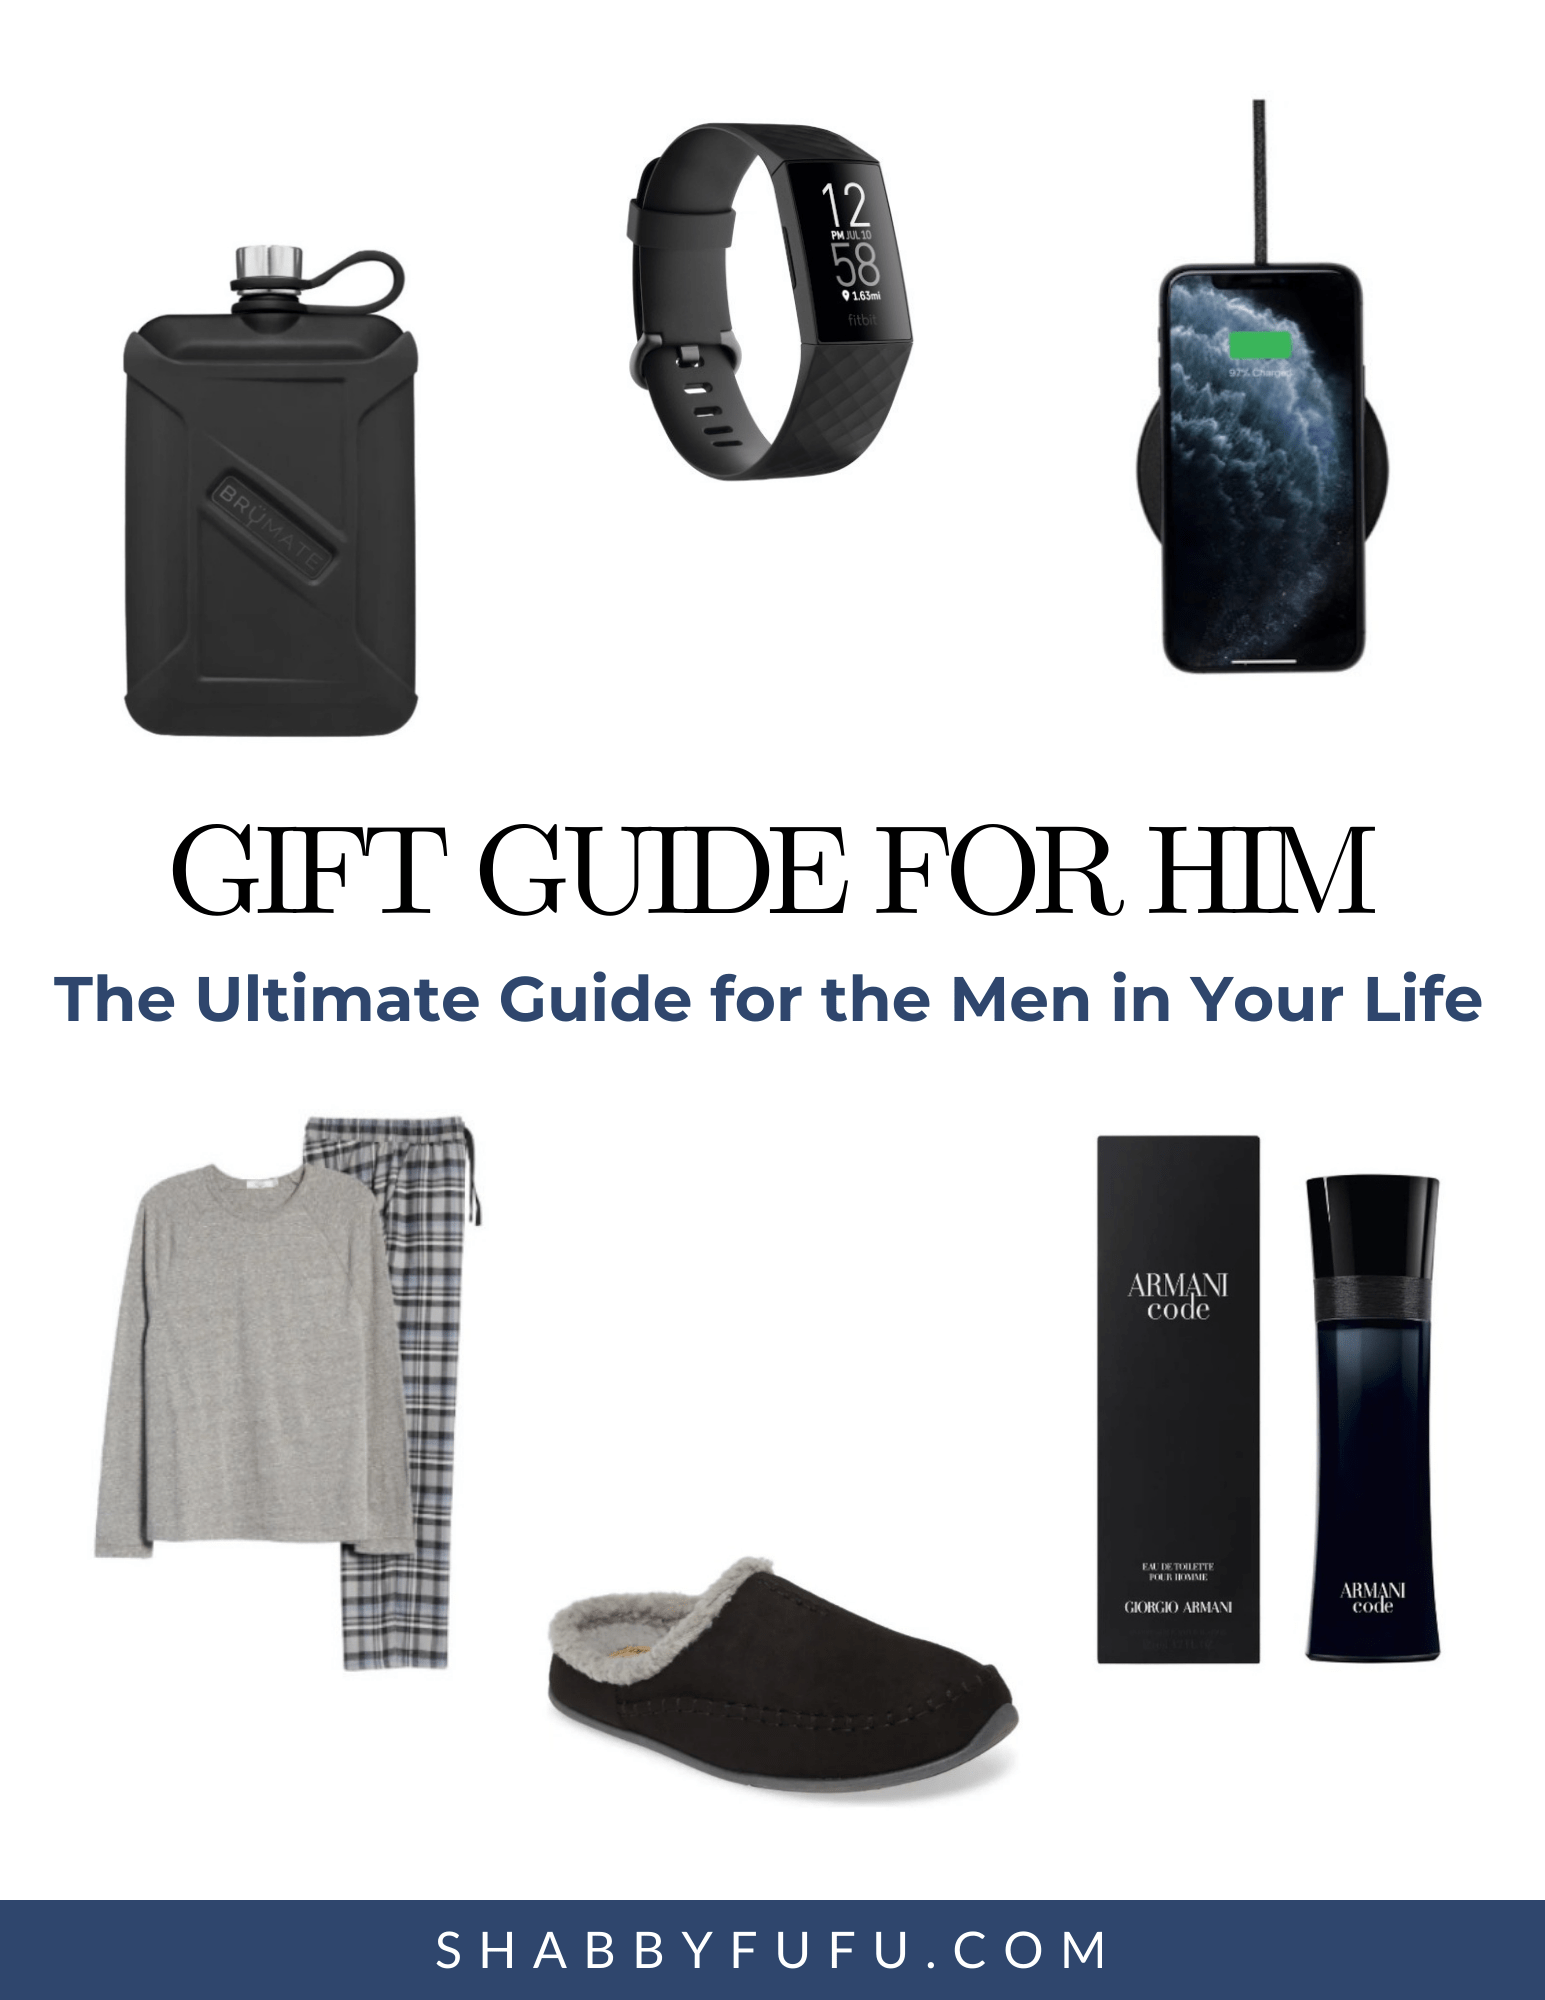 Gift Guide for Him: The Ultimate Guide for the Men in Your Life